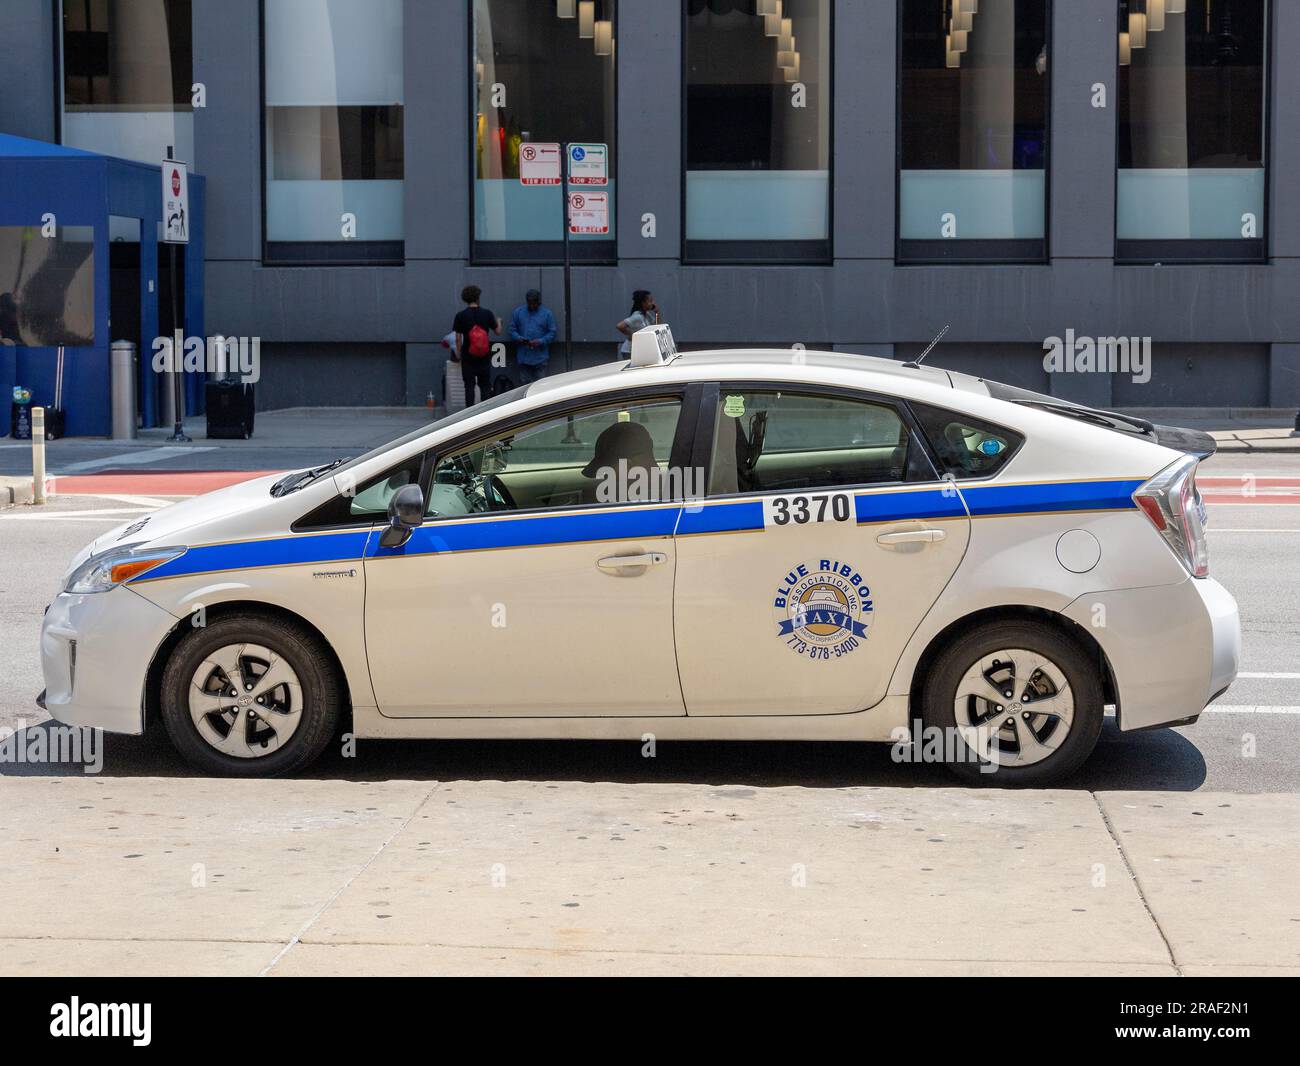 Blue Ribbon Chicago Prius Taxi Cab Parked On A City Street Waiting For Clients Chicago Downtown. Stock Photo